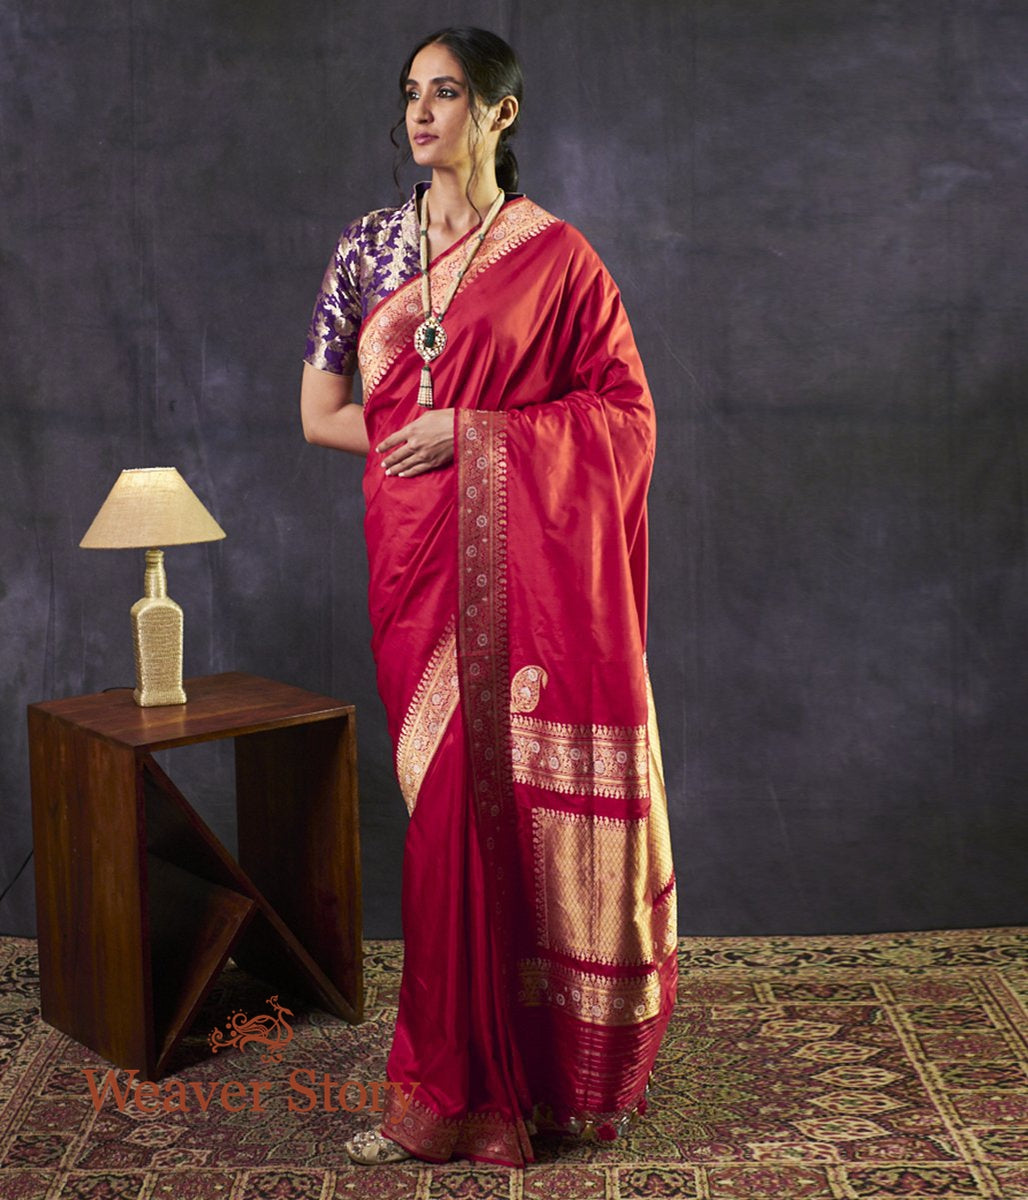 Handwoven_Red_Plain_Saree_with_Gold_and_Silver_Meenakri_Border_WeaverStory_02